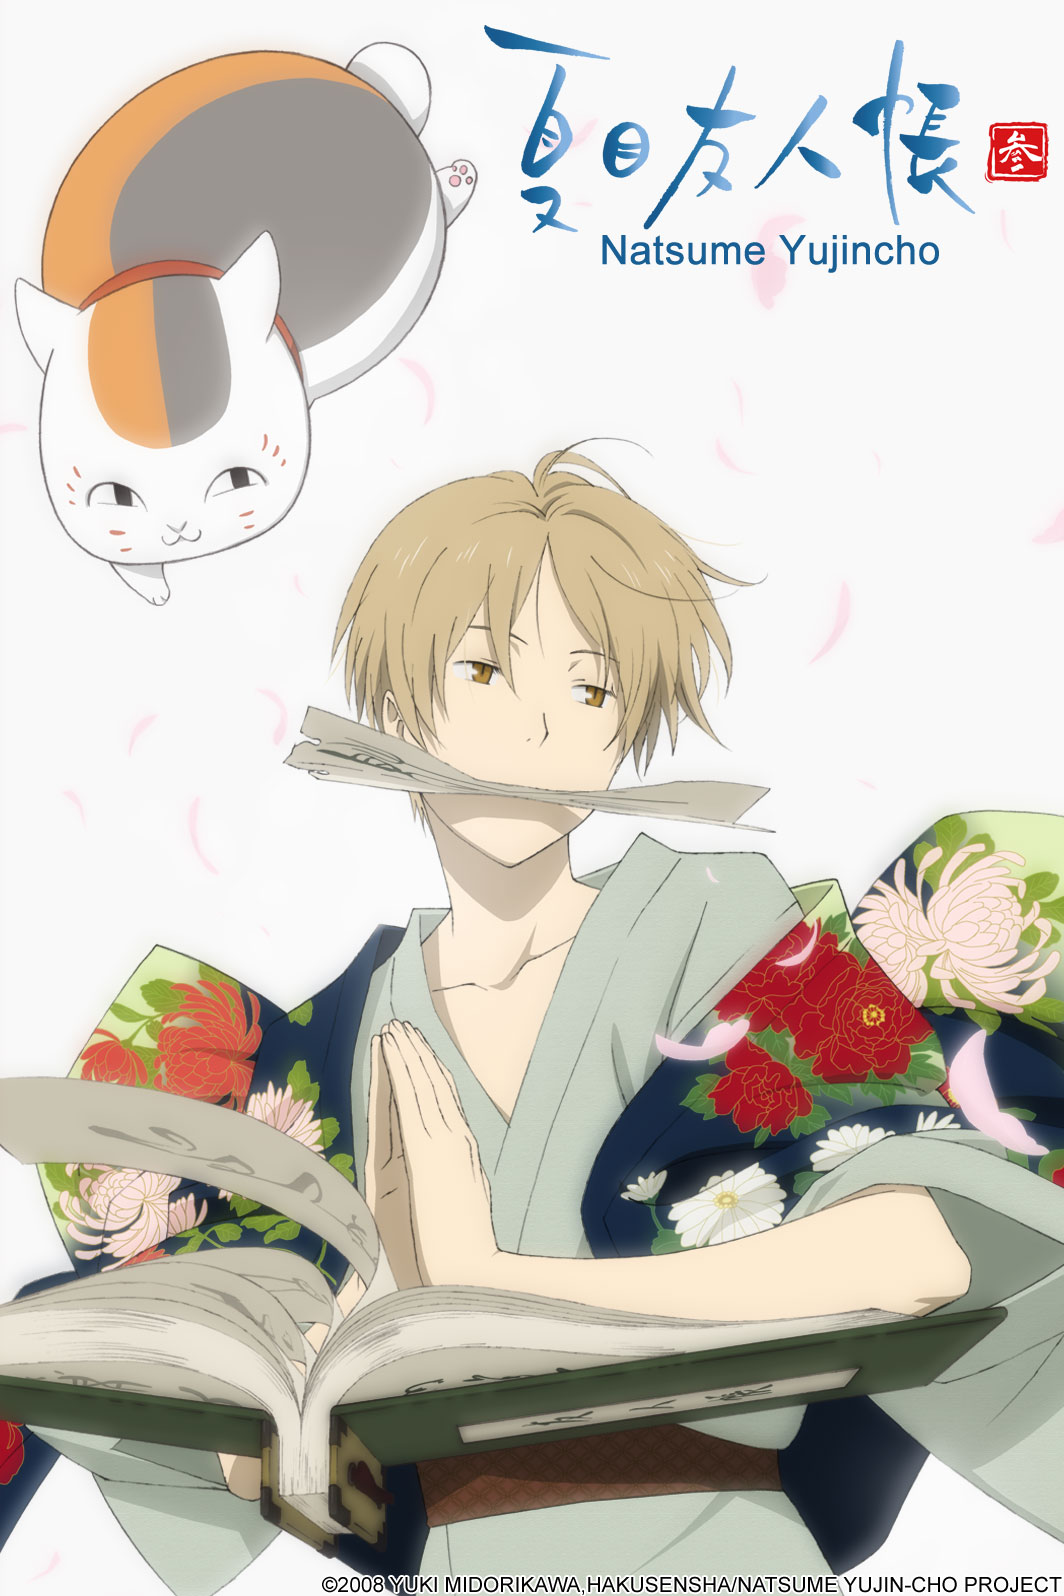 English Dub Review: Natsume’s Book of Friends “Distant Festival Lights”